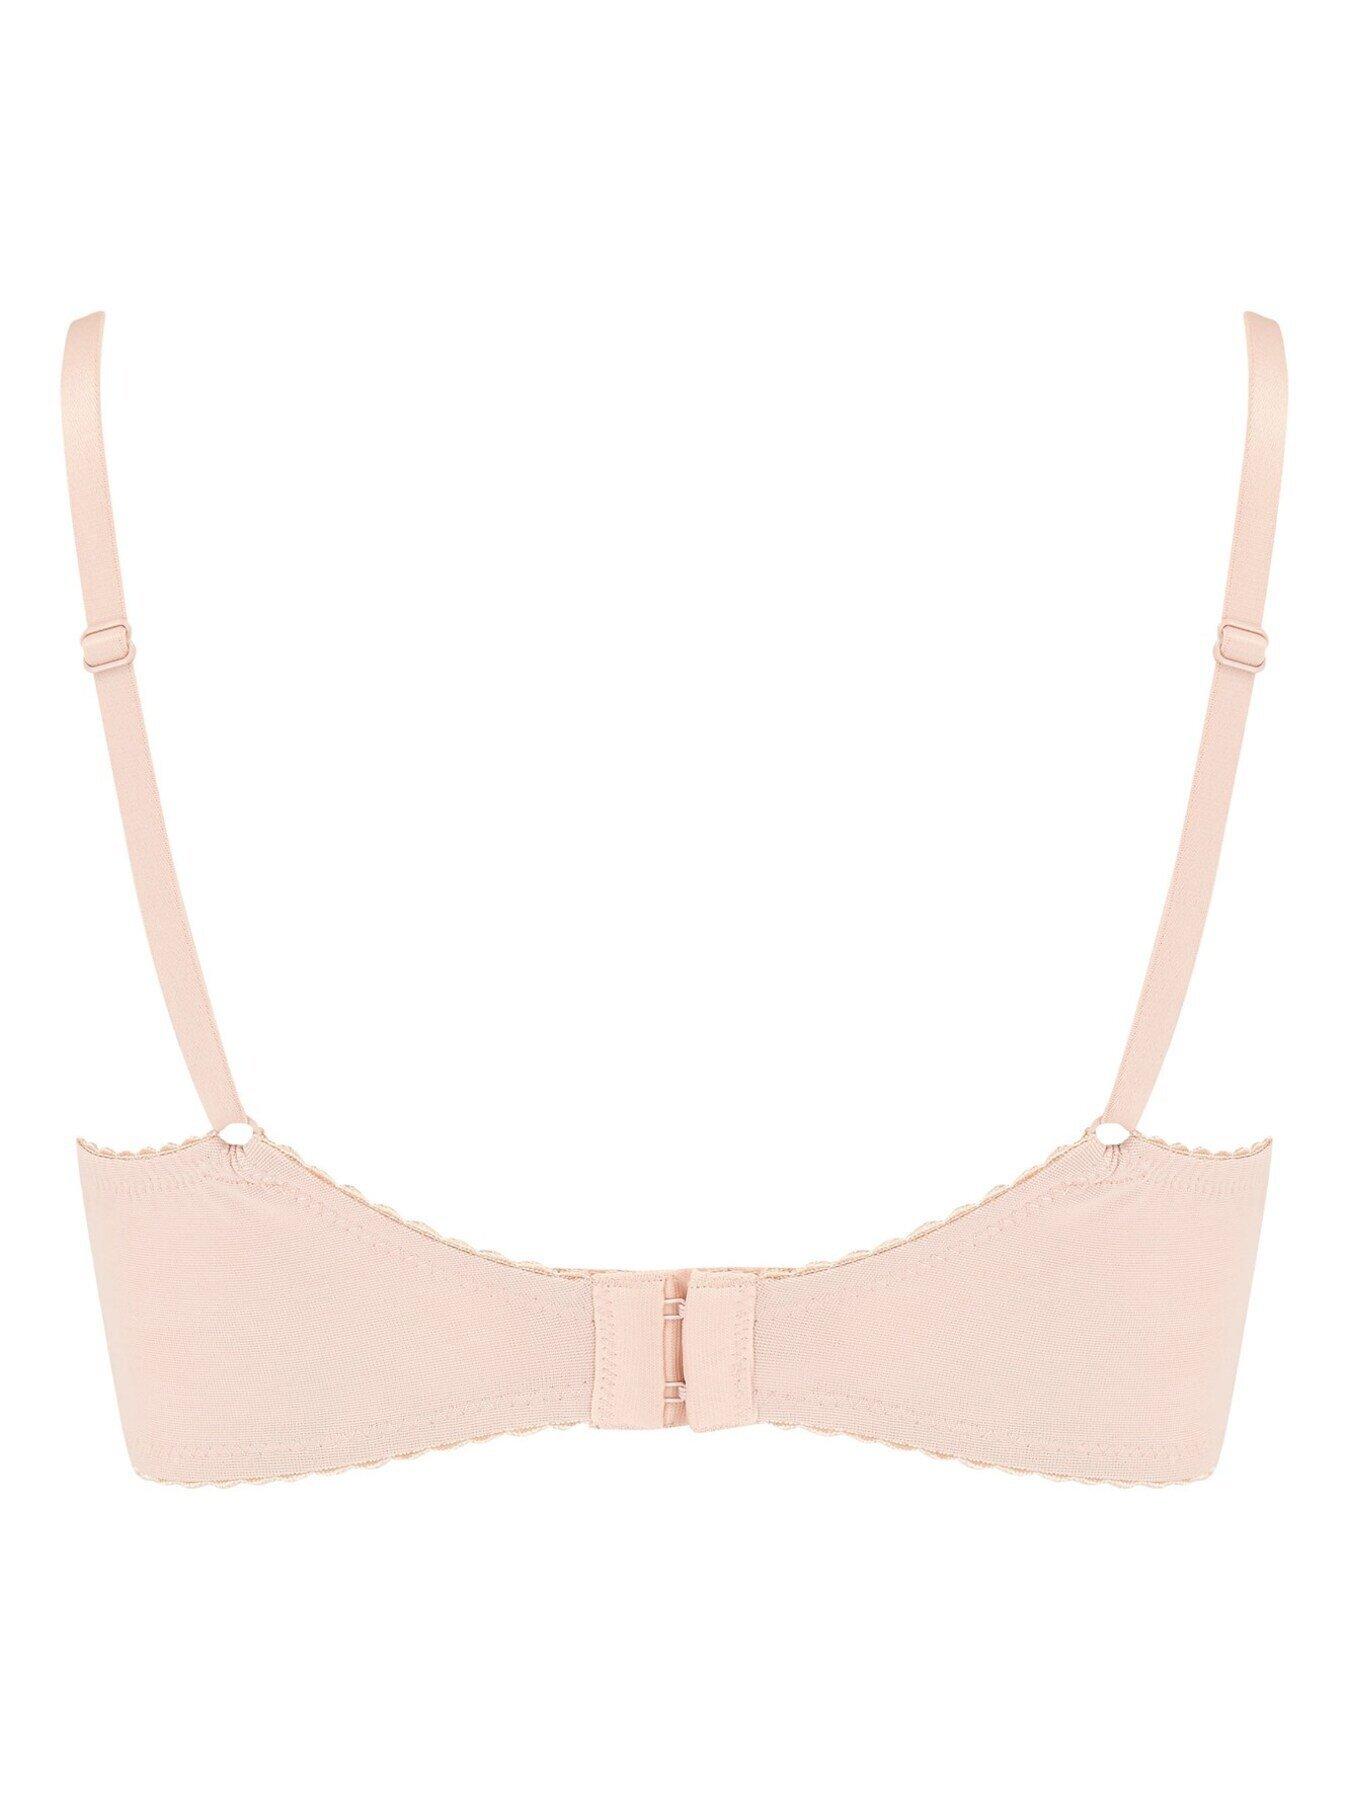 Pour Moi Rosalind Full Cup Underwired Bra - Natural